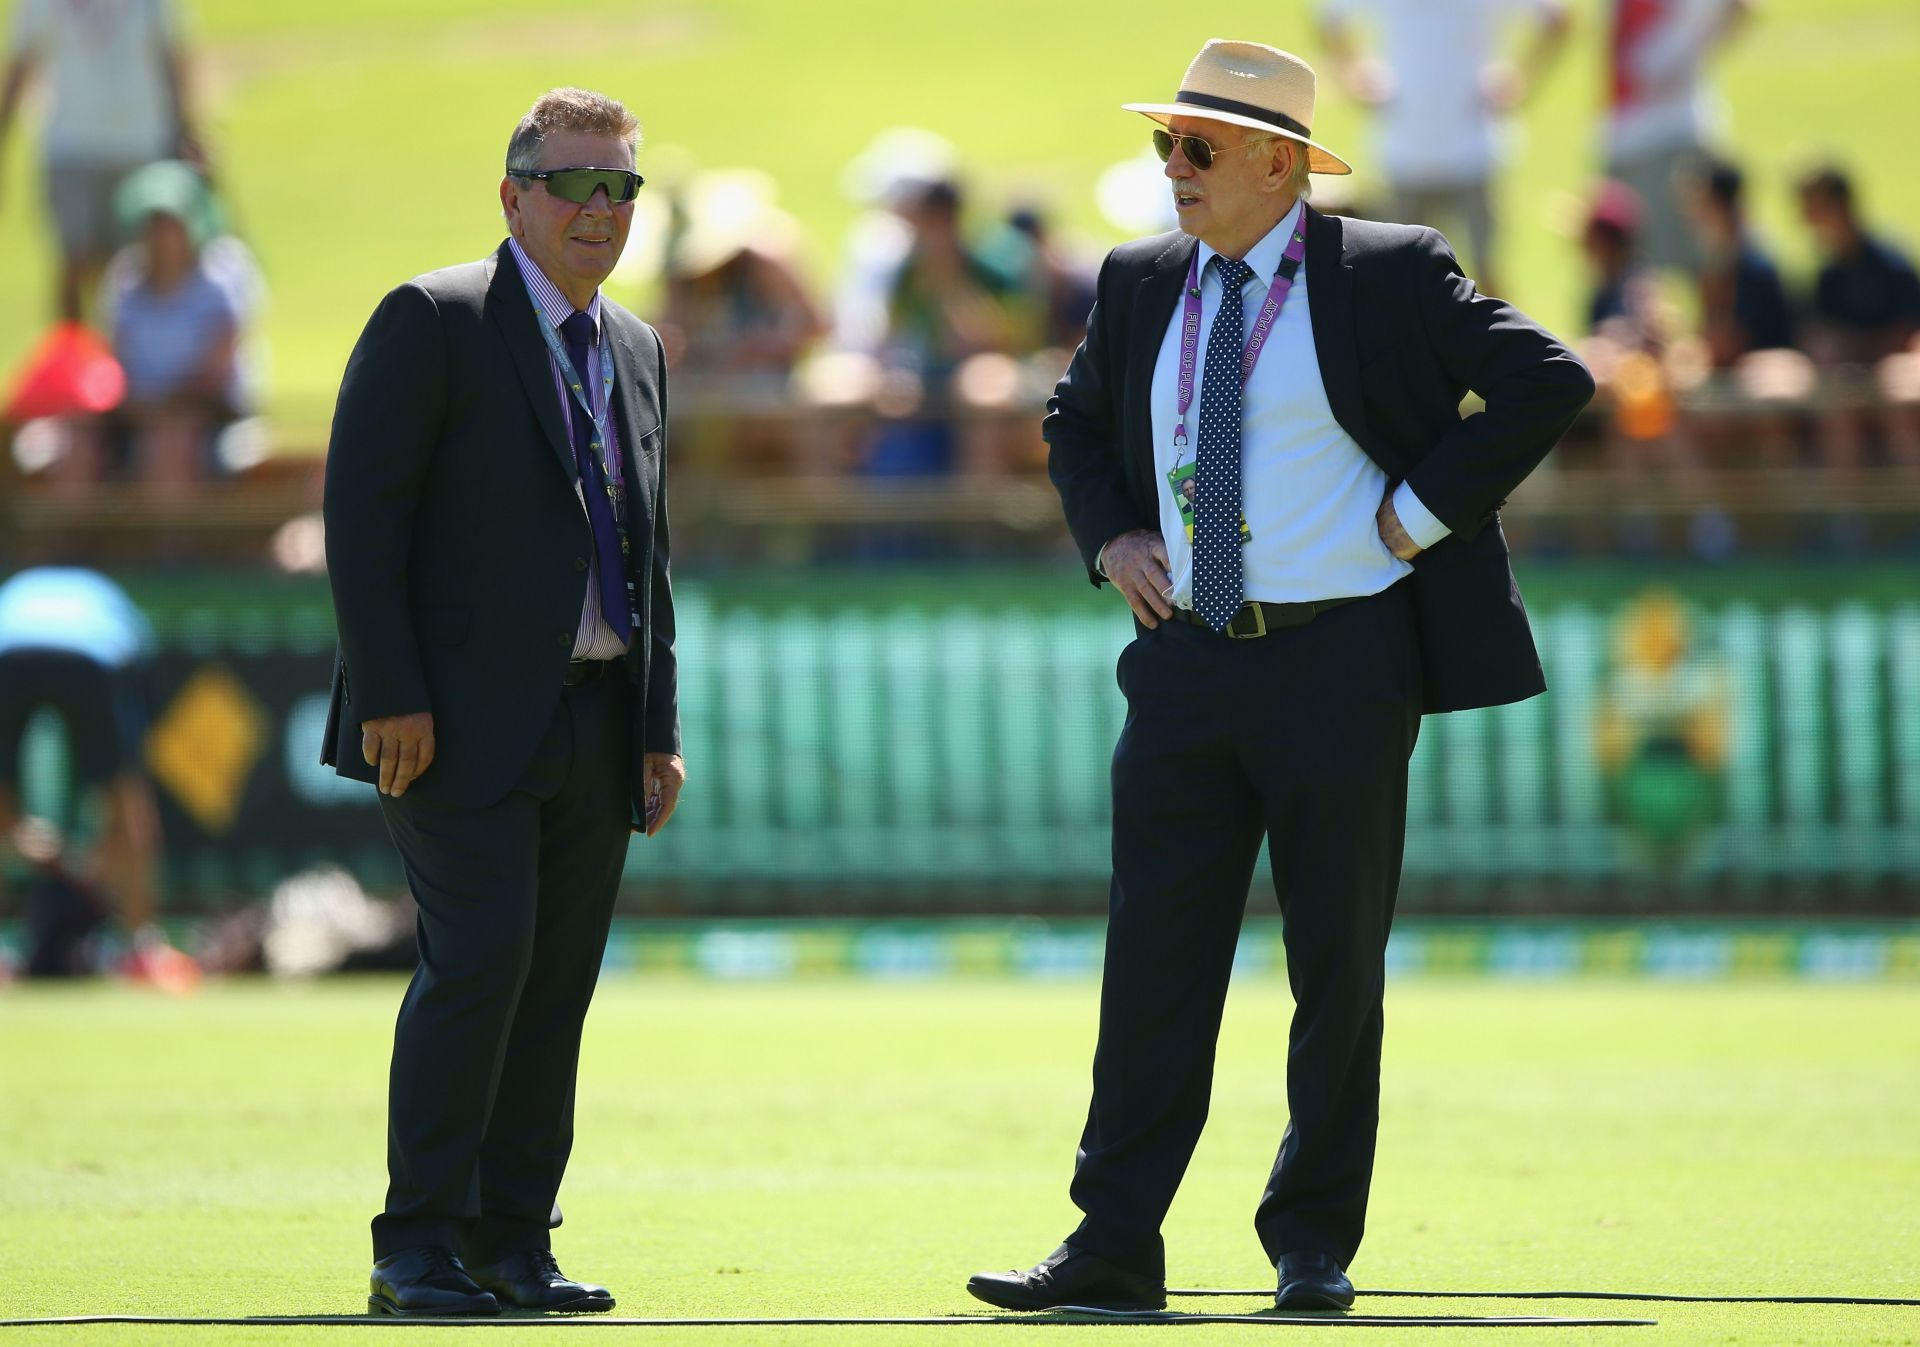 Ian Chappell (left) and Rod Marsh. (Credits: Getty)